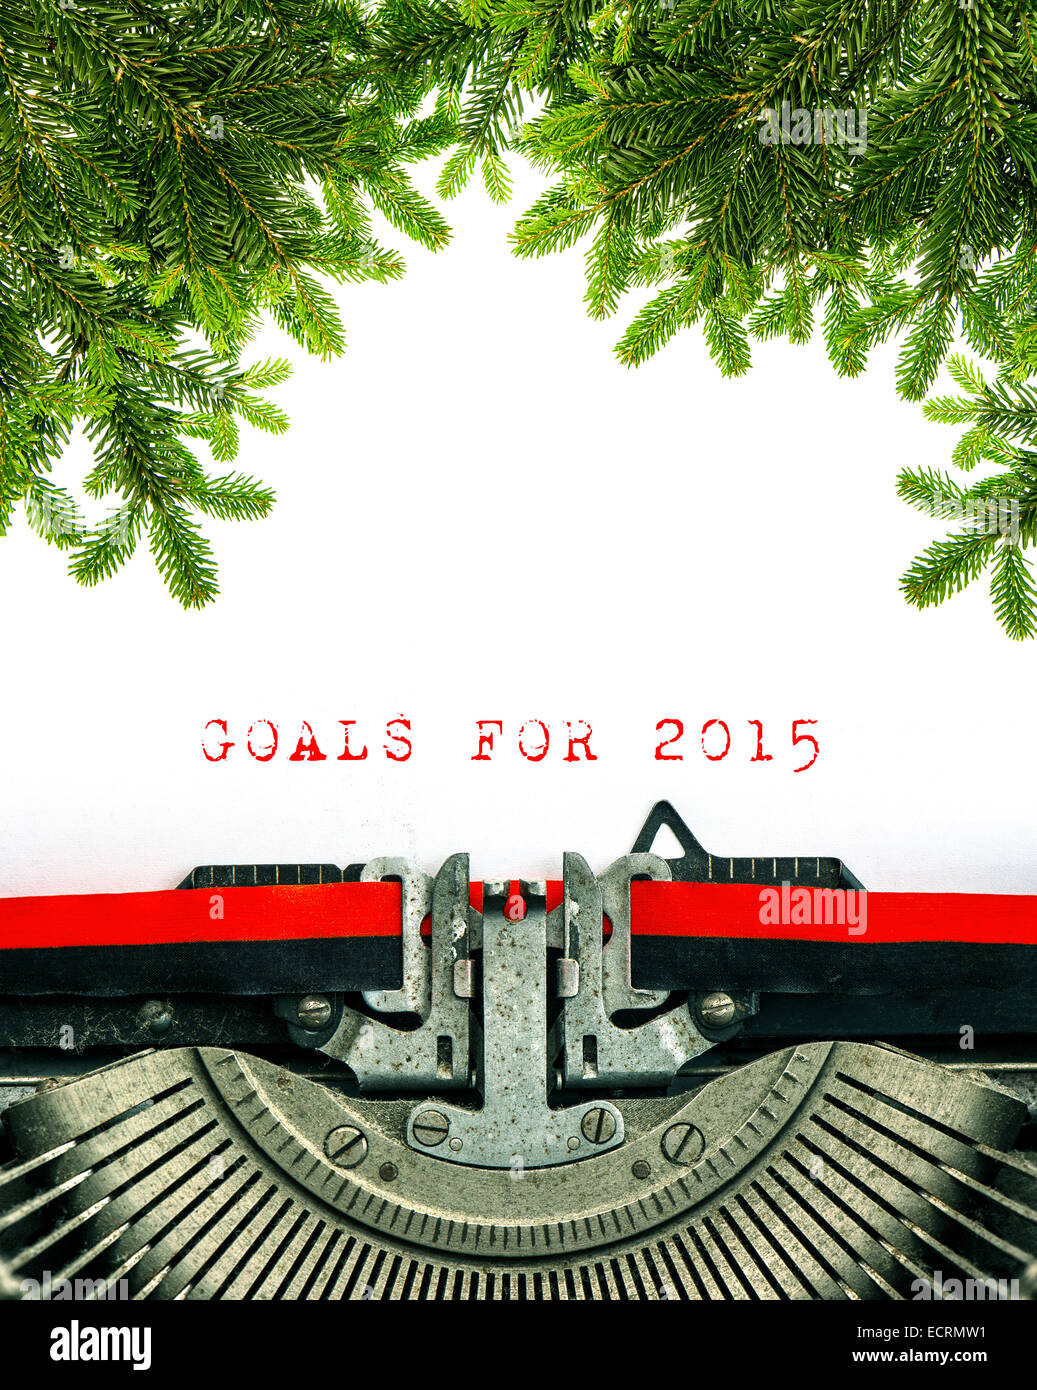 Old typewriter with sample text GOALS FOR 2015. Christmas tree twigs decoration Stock Photo